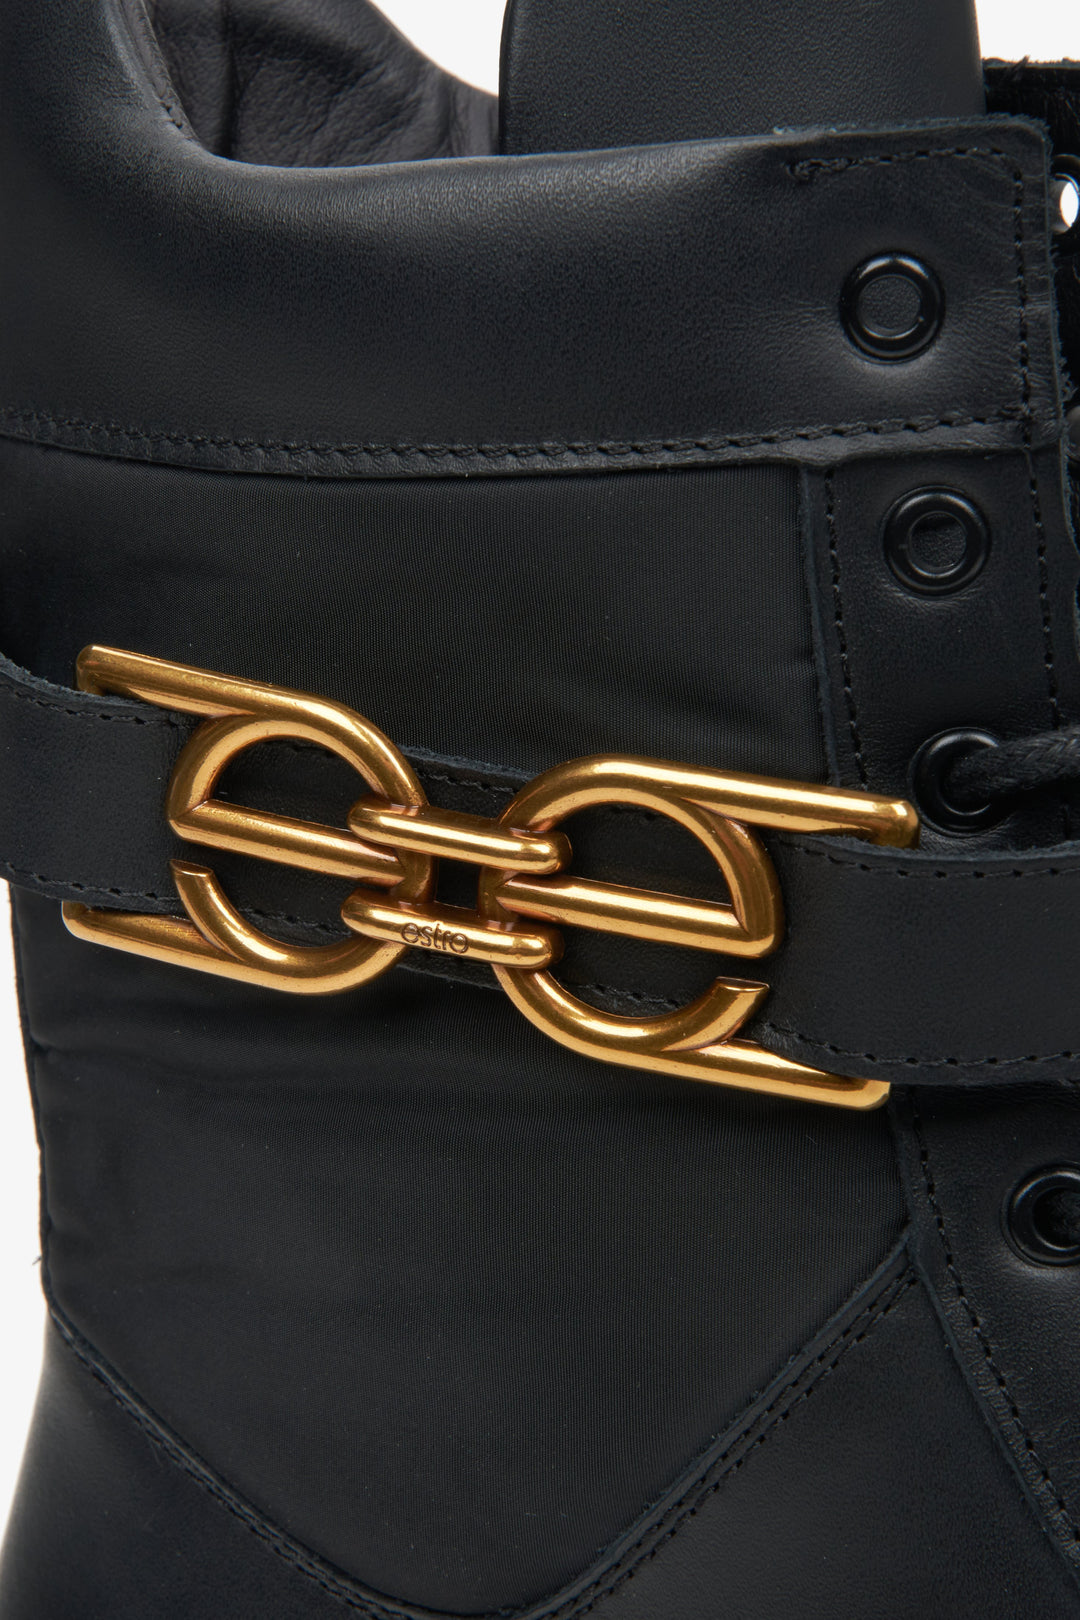 Elegant black women's ankle boots natural leather with a golden ornament - close-up on details.